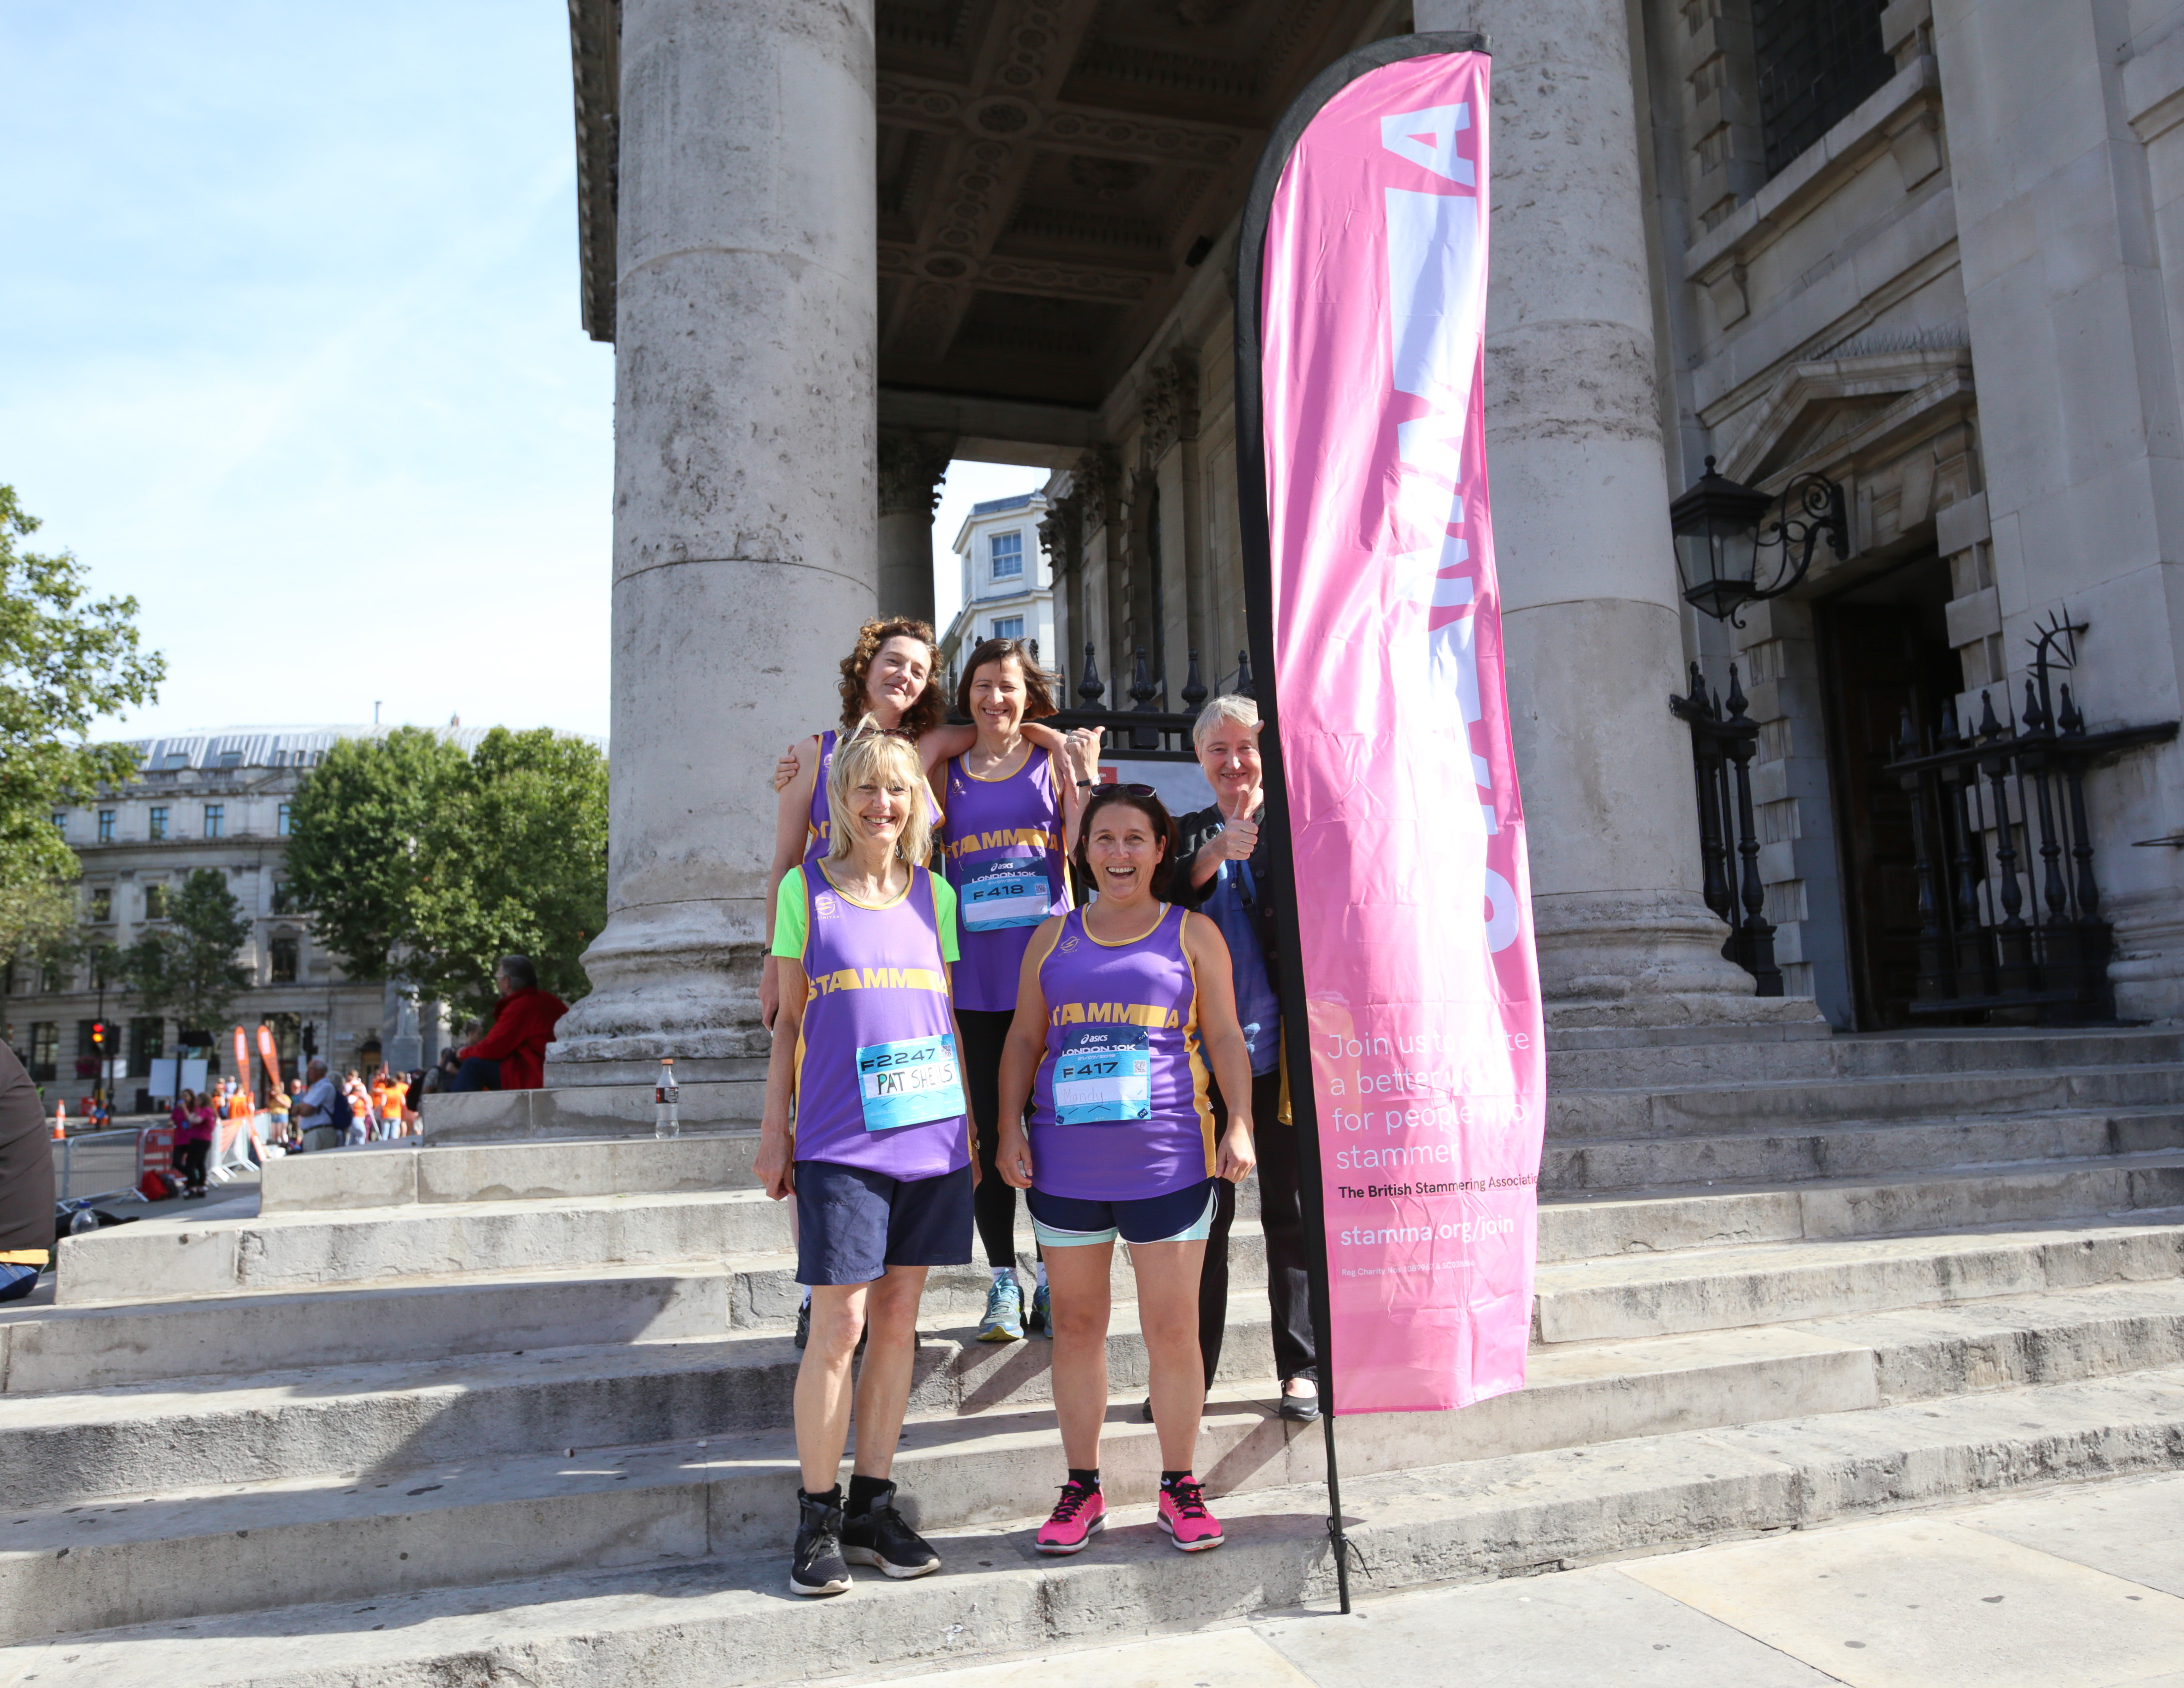 Team Stamma at the London 10k